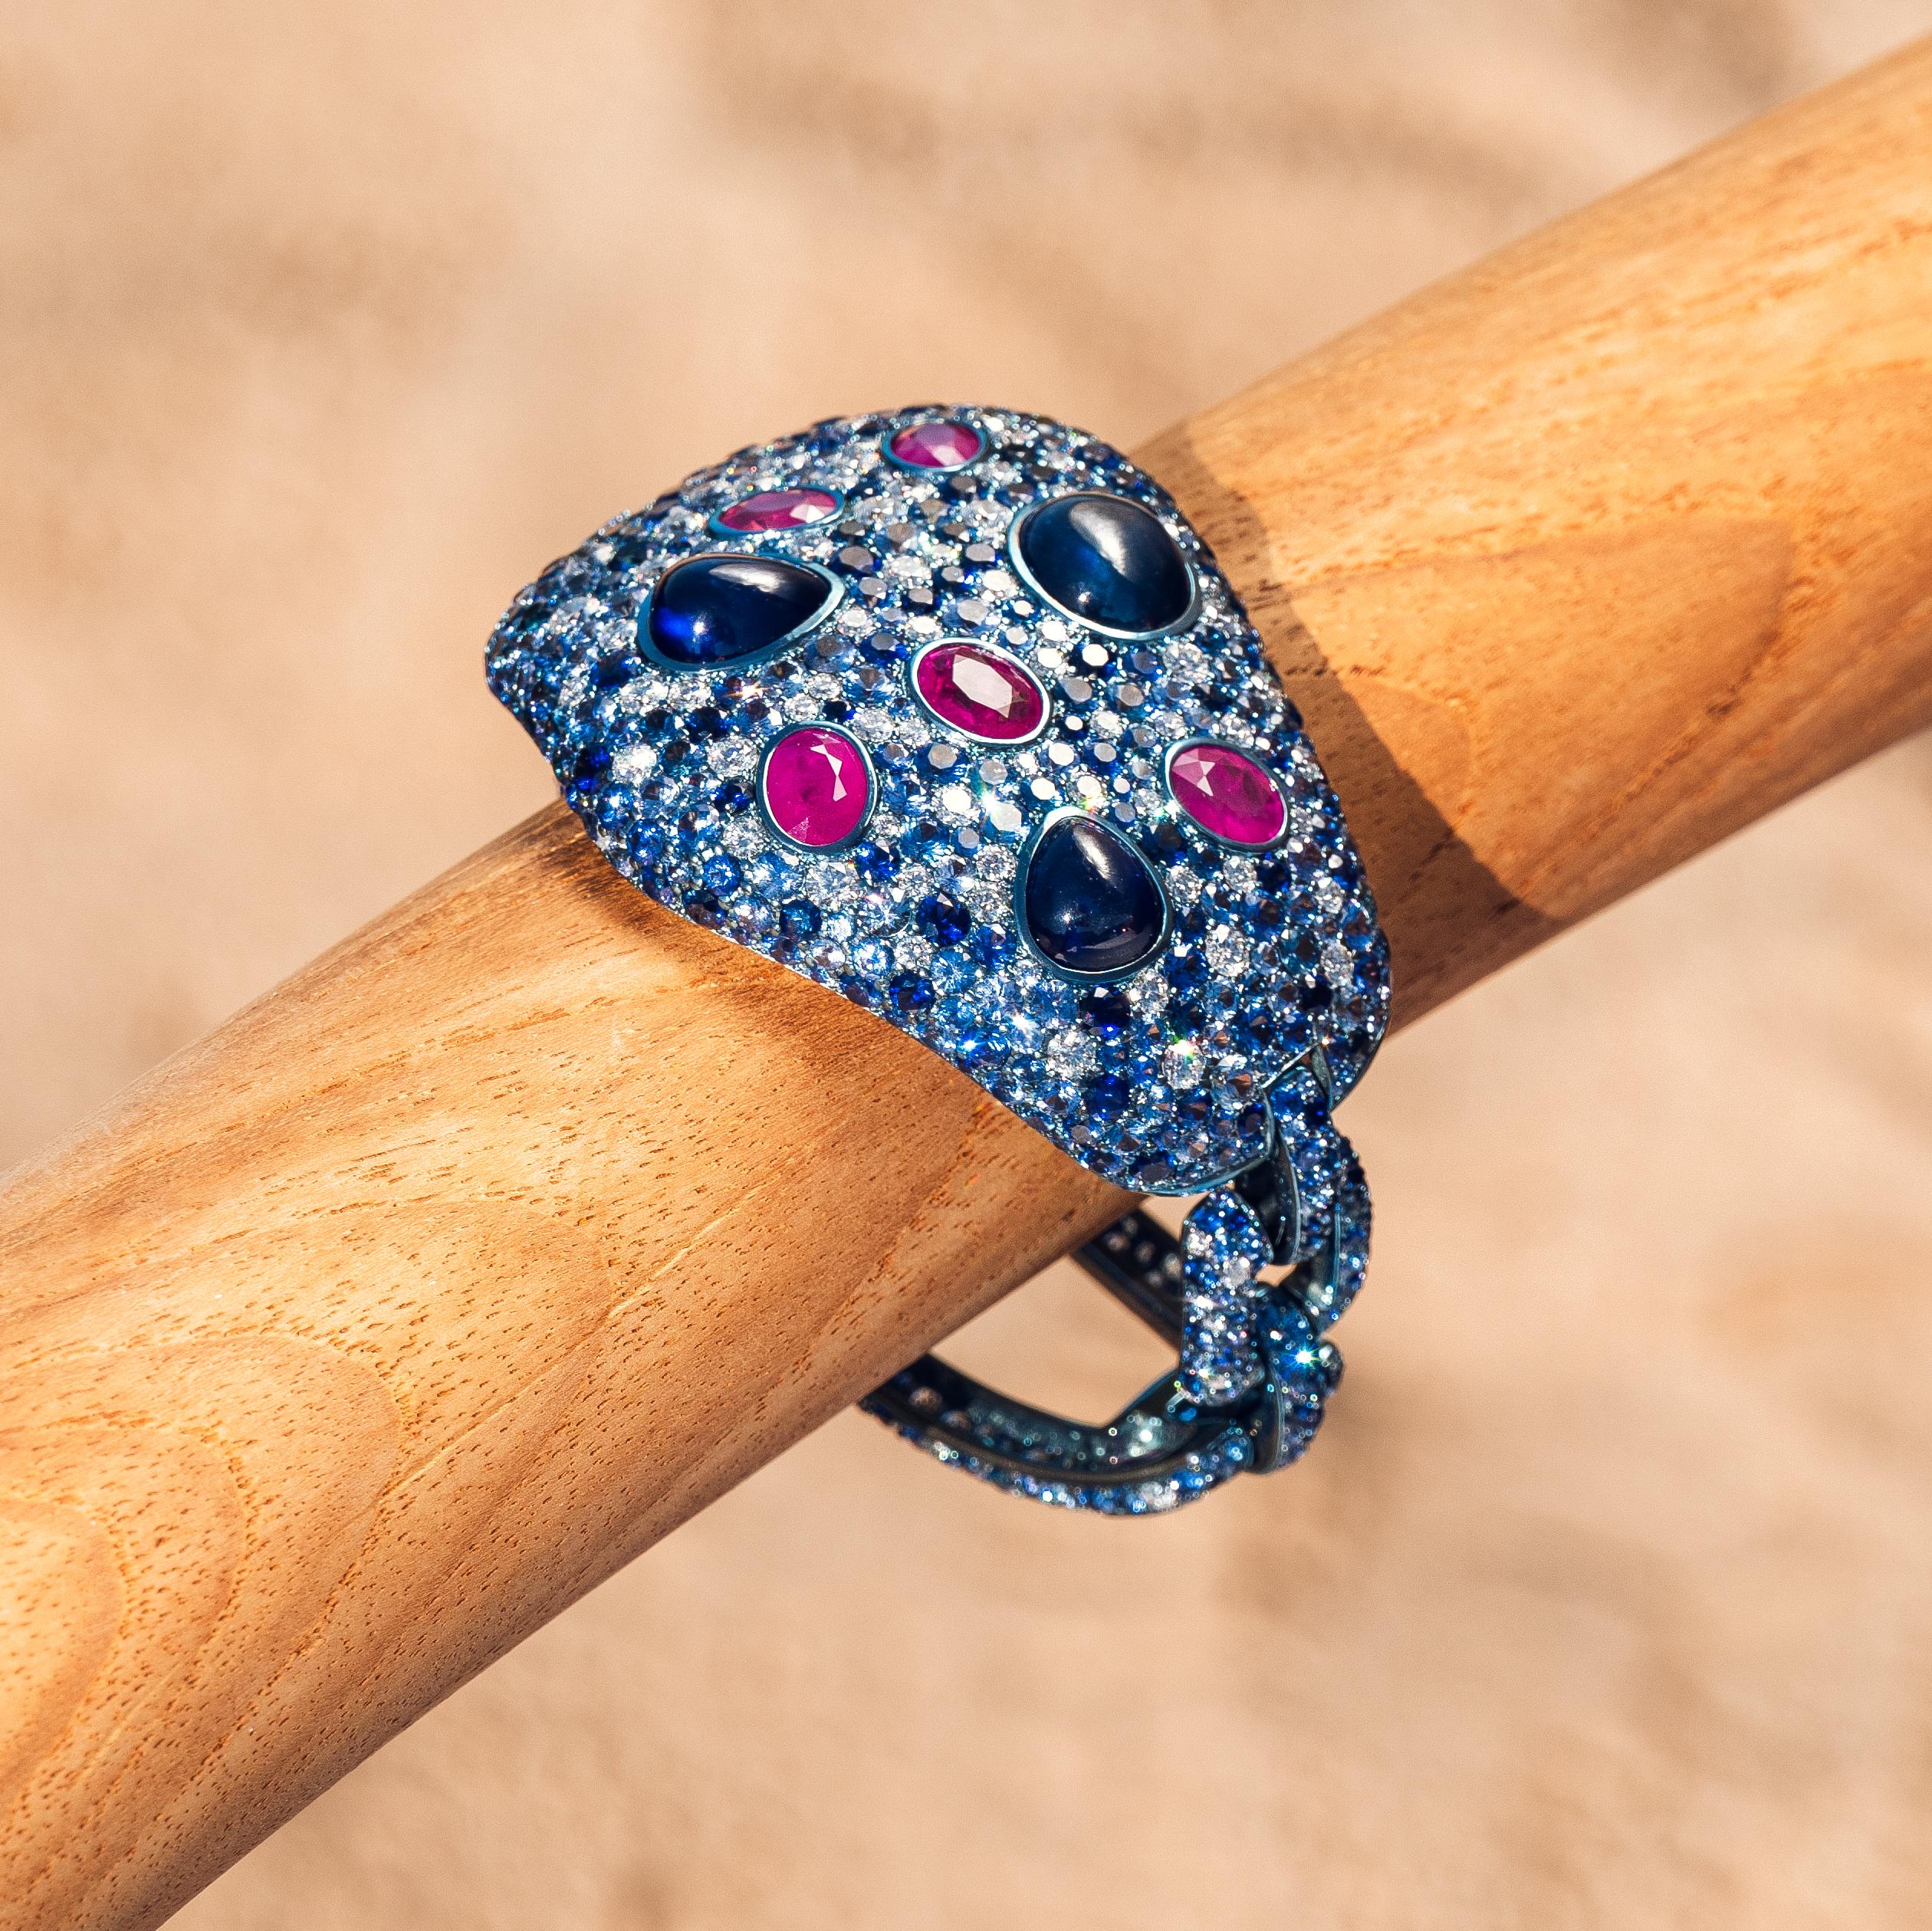 Sabbadini 51 Carat Blue Sapphire Titanium Bracelet with Rubies and Diamonds In New Condition For Sale In Milan, IT